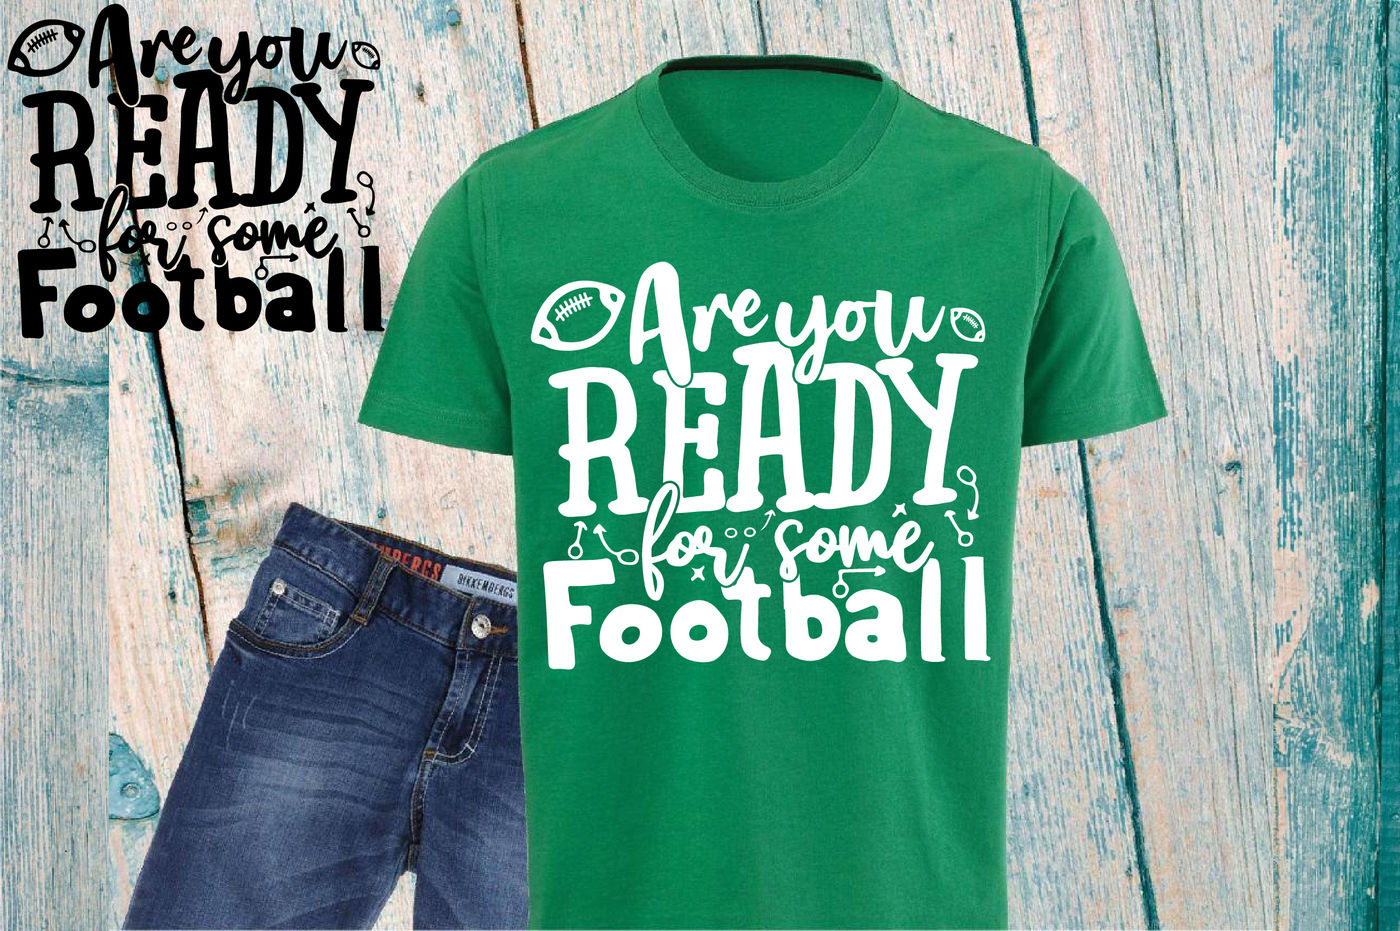 ori 3477495 b581c9d7b10d203eb9d82df8ac9e0af4a3db37ec are you ready for some football svg ball sport high school 912s